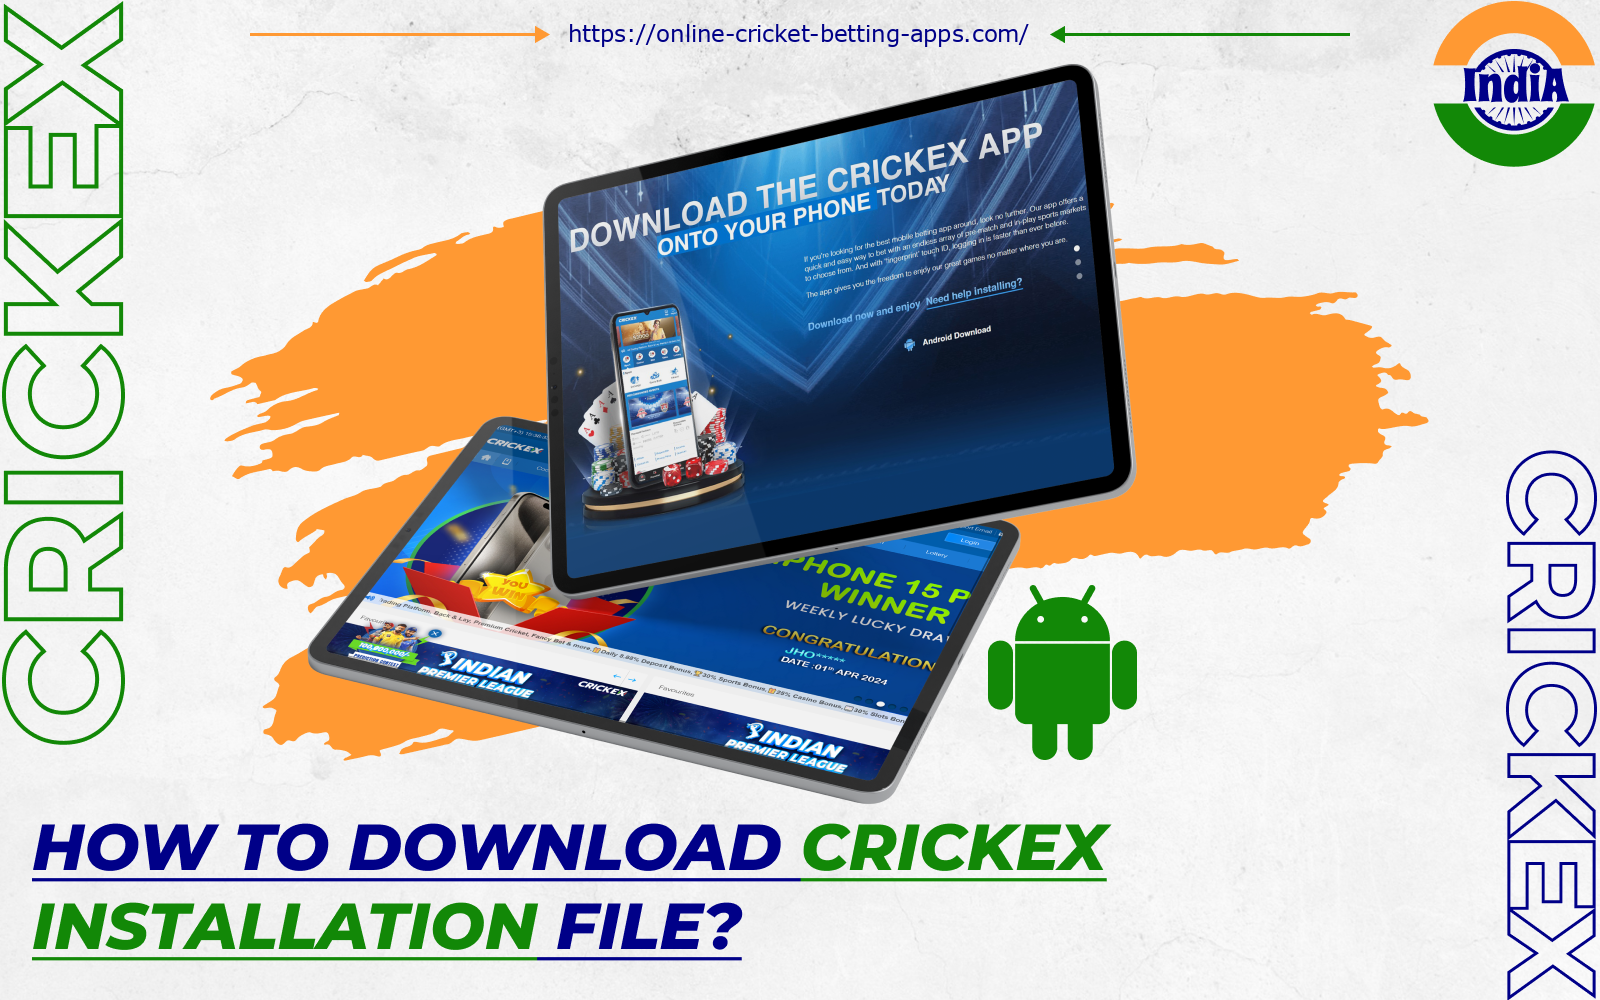 To install the Crickex app on Android, Indians first need to download a special APK file